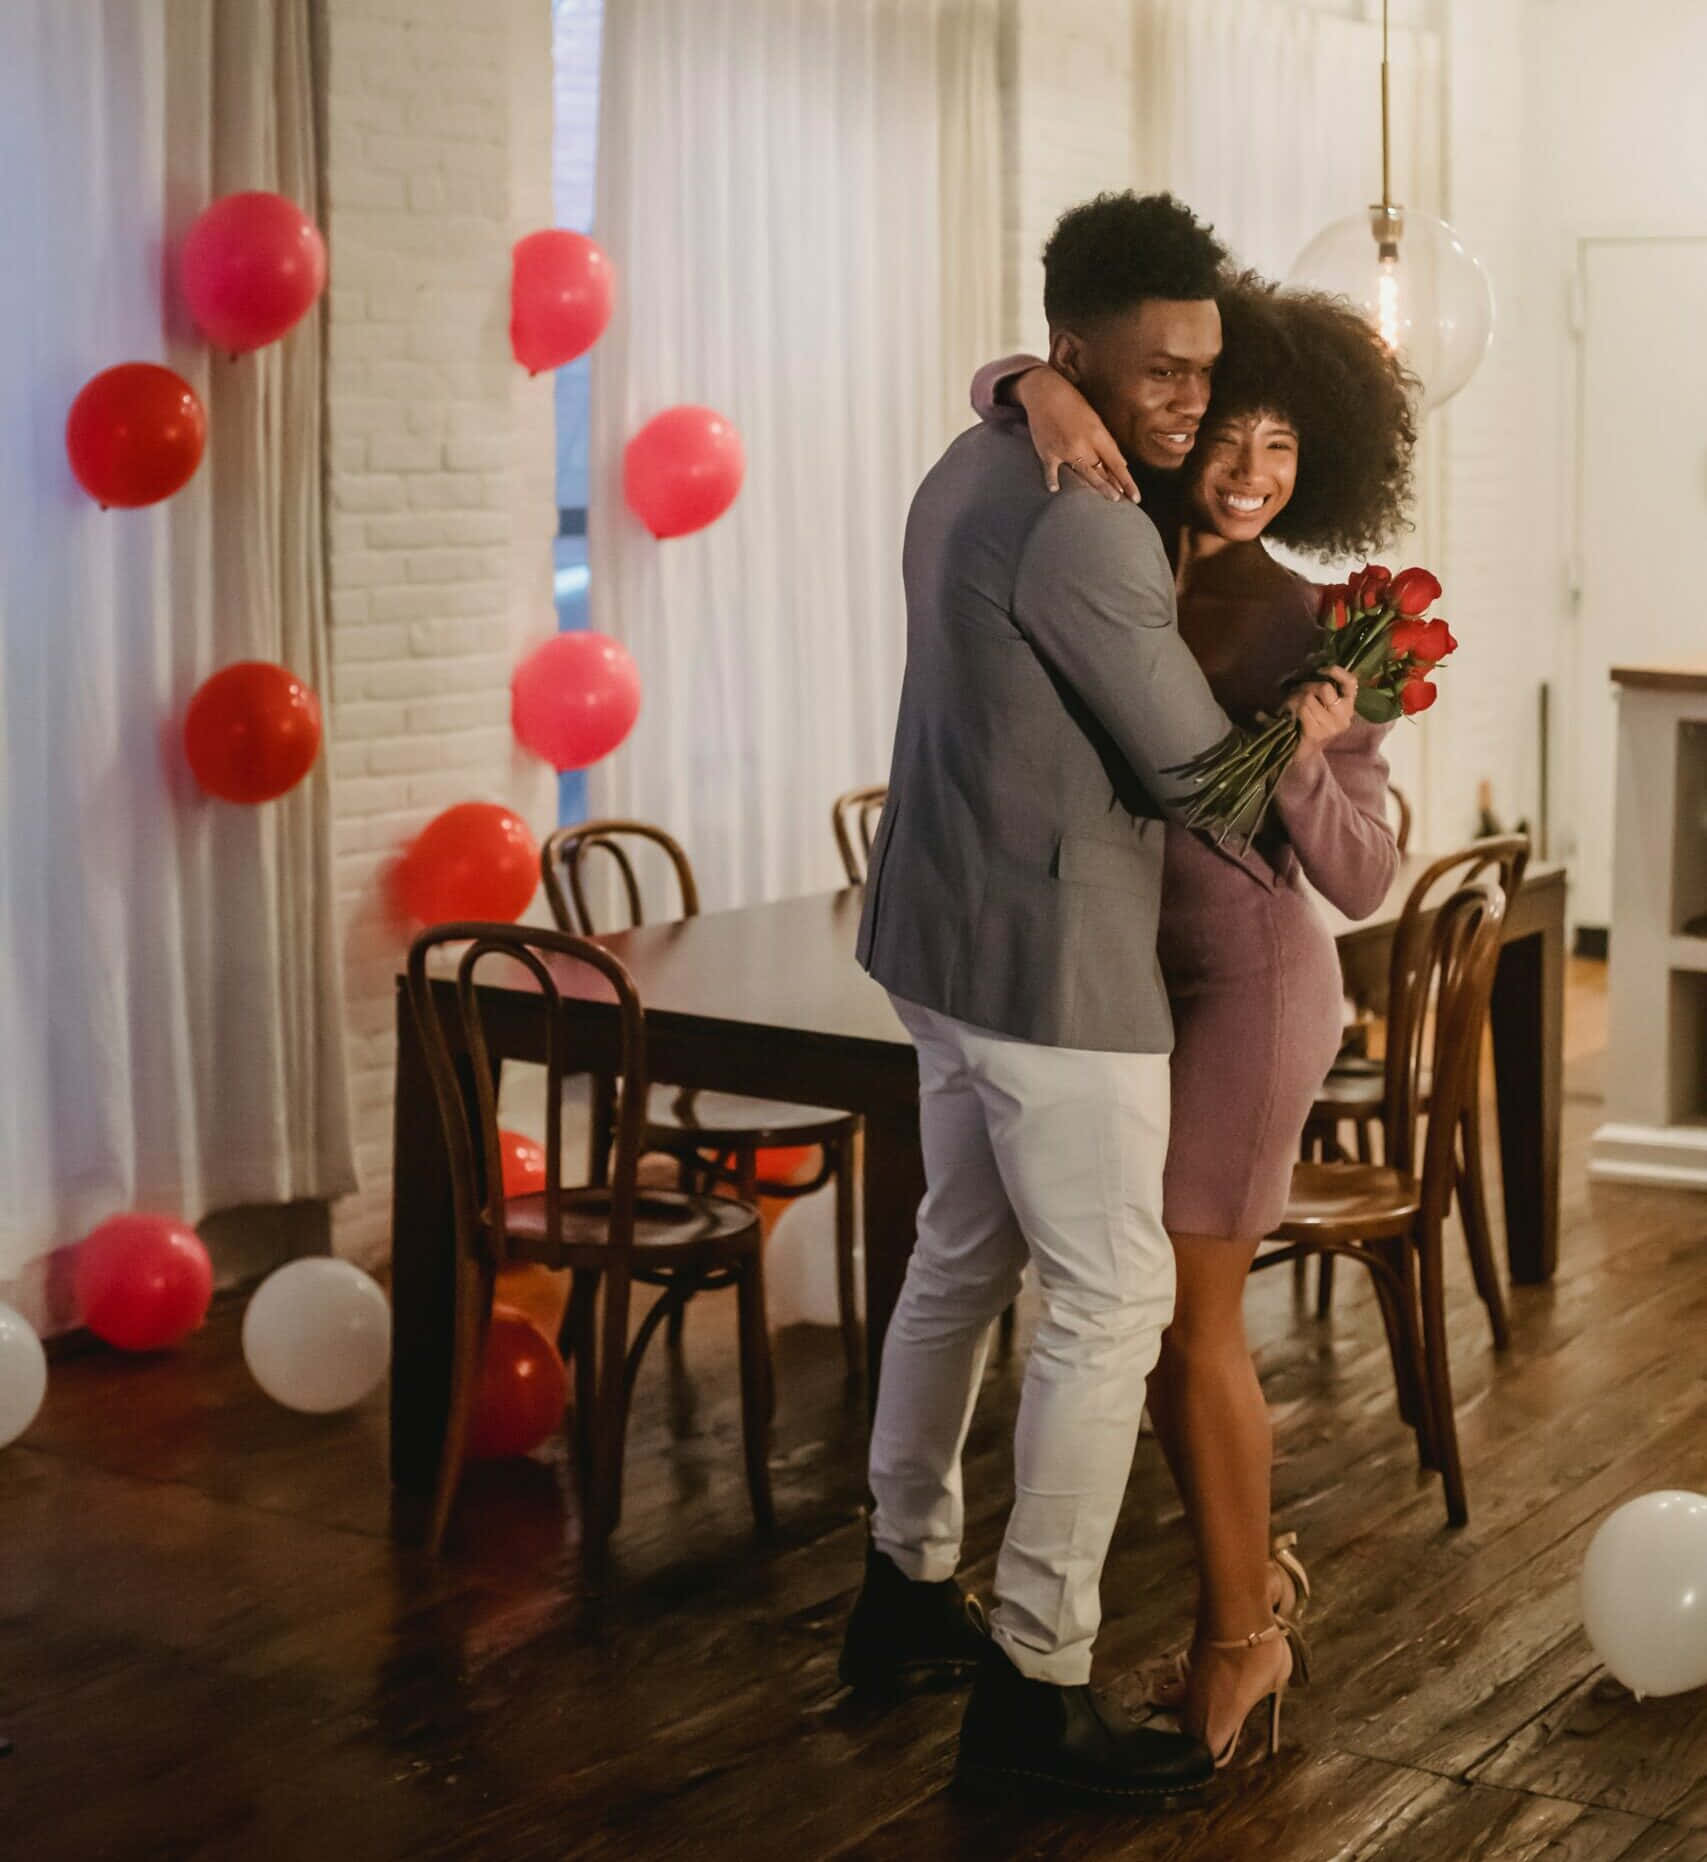 A Couple Hugging In A Living Room With Balloons